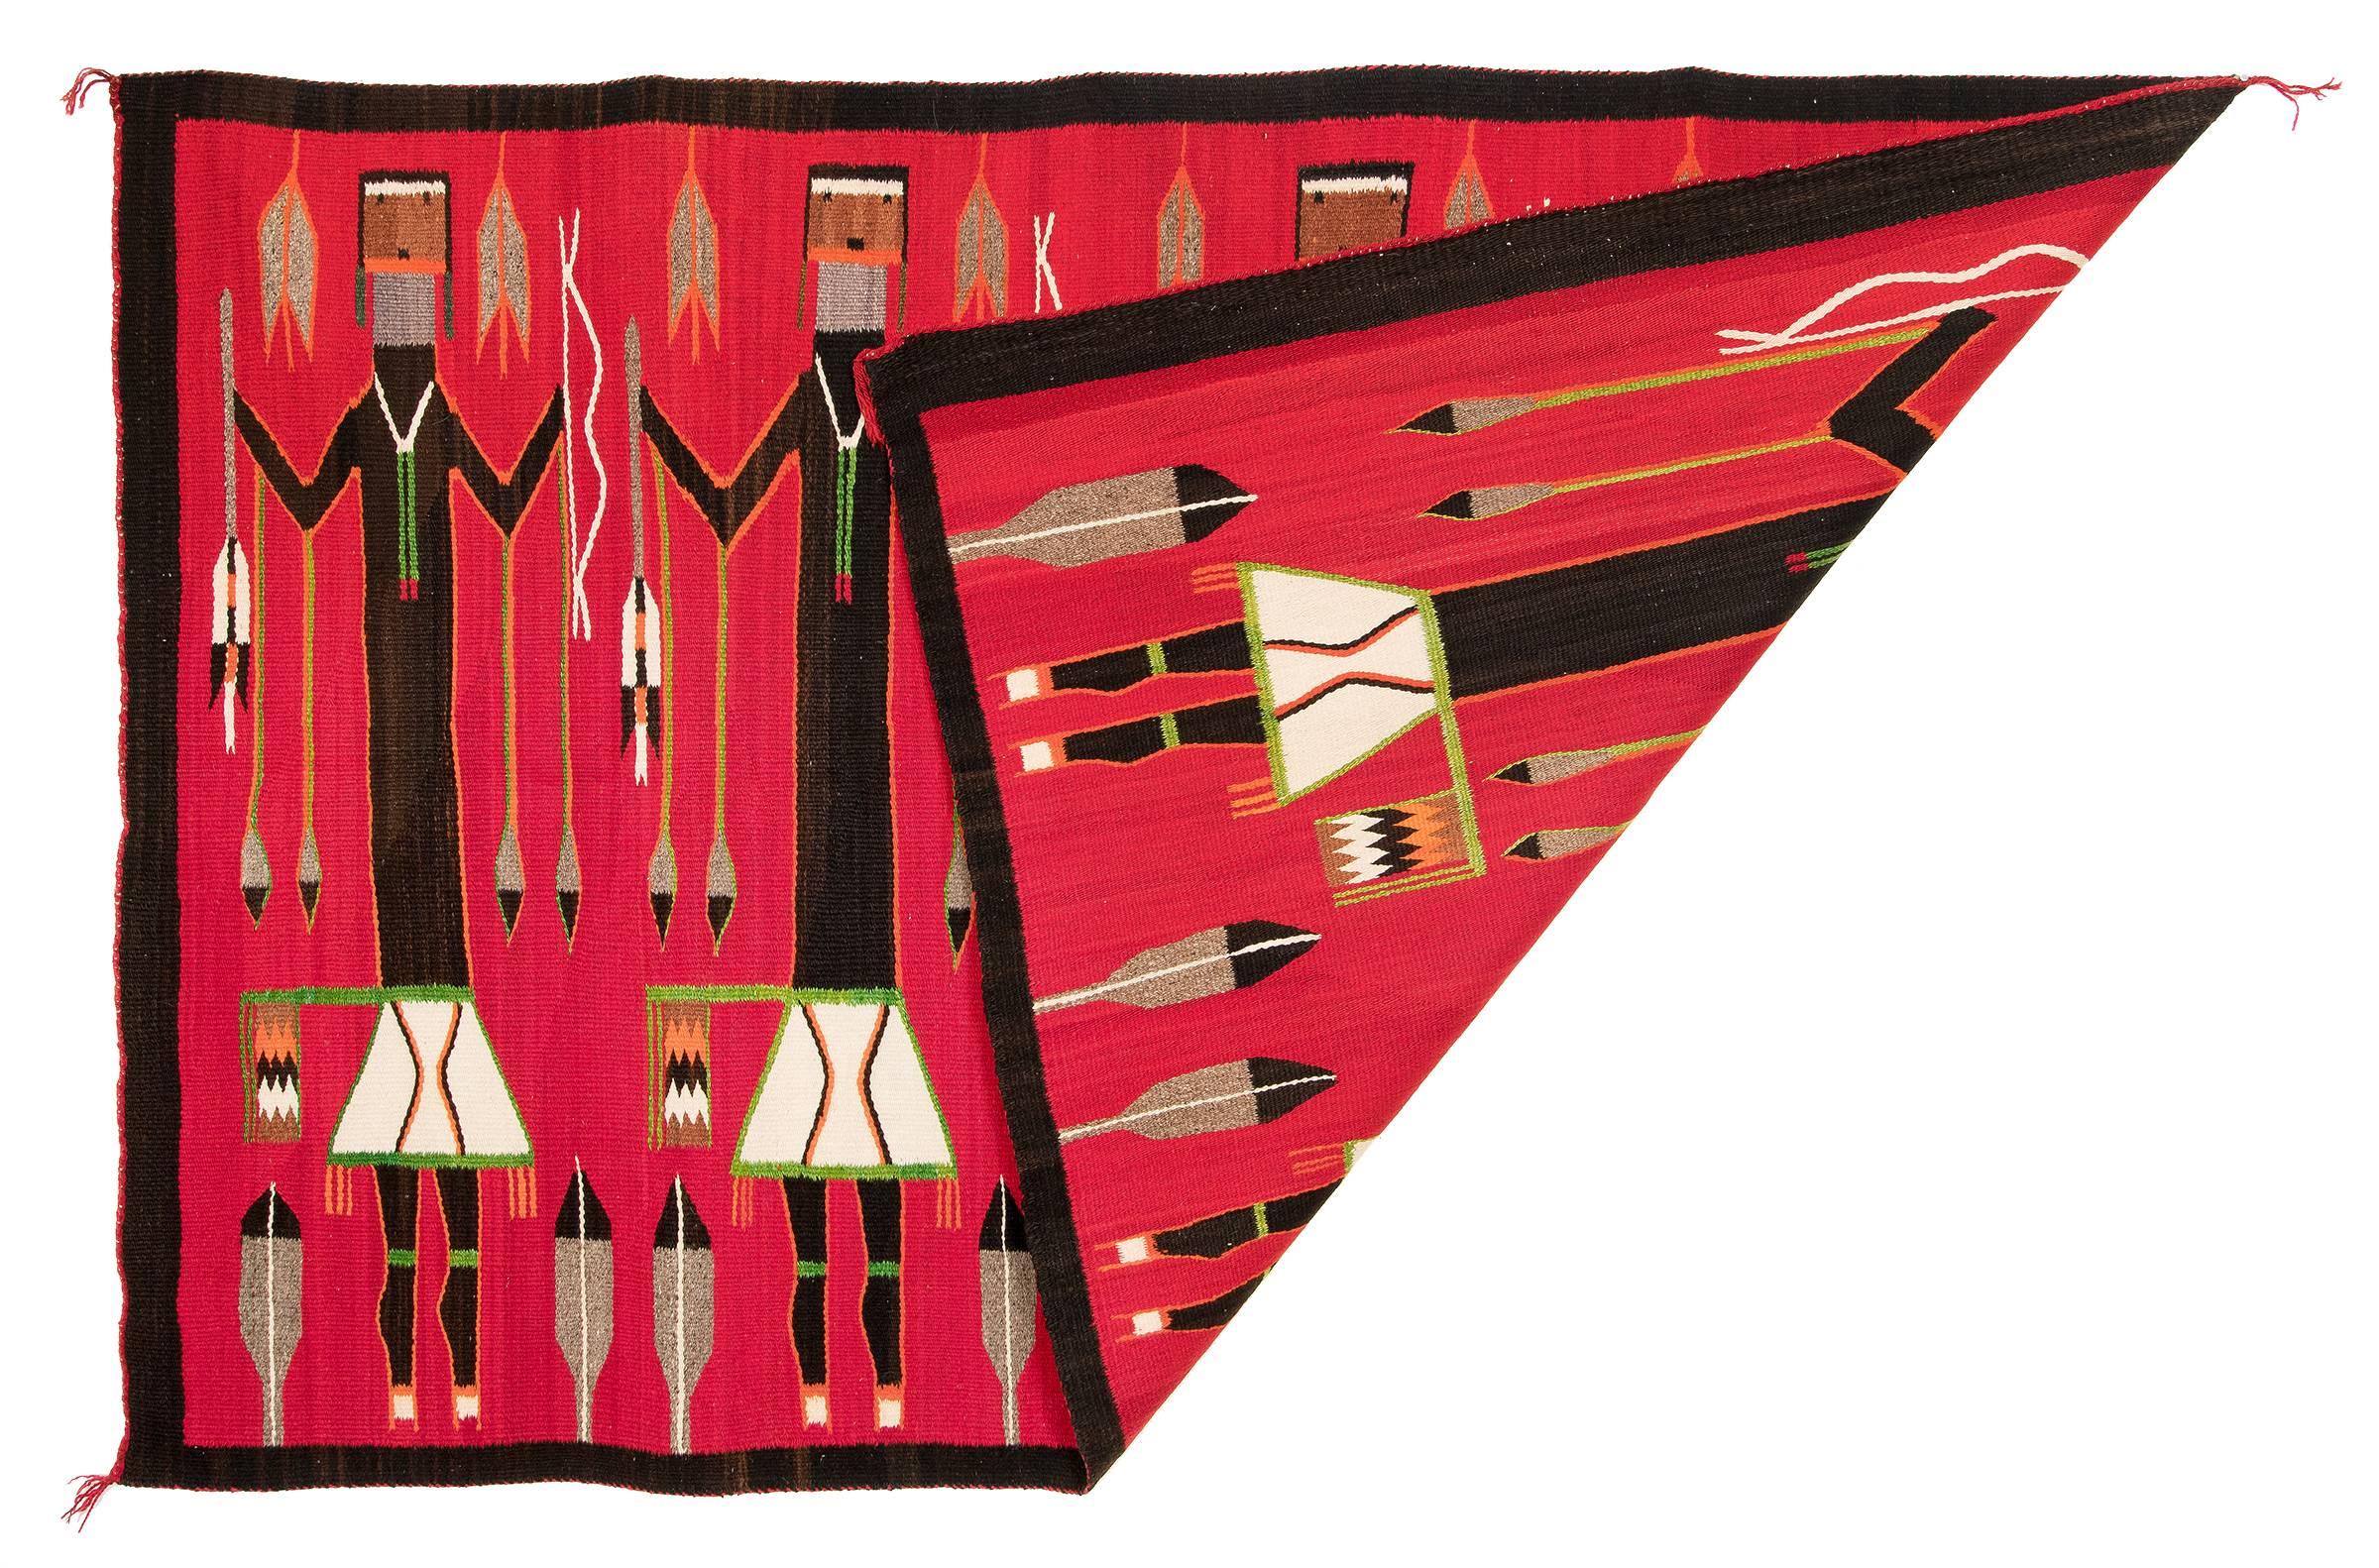 A pictorial weaving depicting four Yei figures with bows and arrows and feathers against a striking red background. Woven of native handspun wool in natural fleece coloring of ivory, gray and black with aniline dyed red, orange and blue.

The Yei